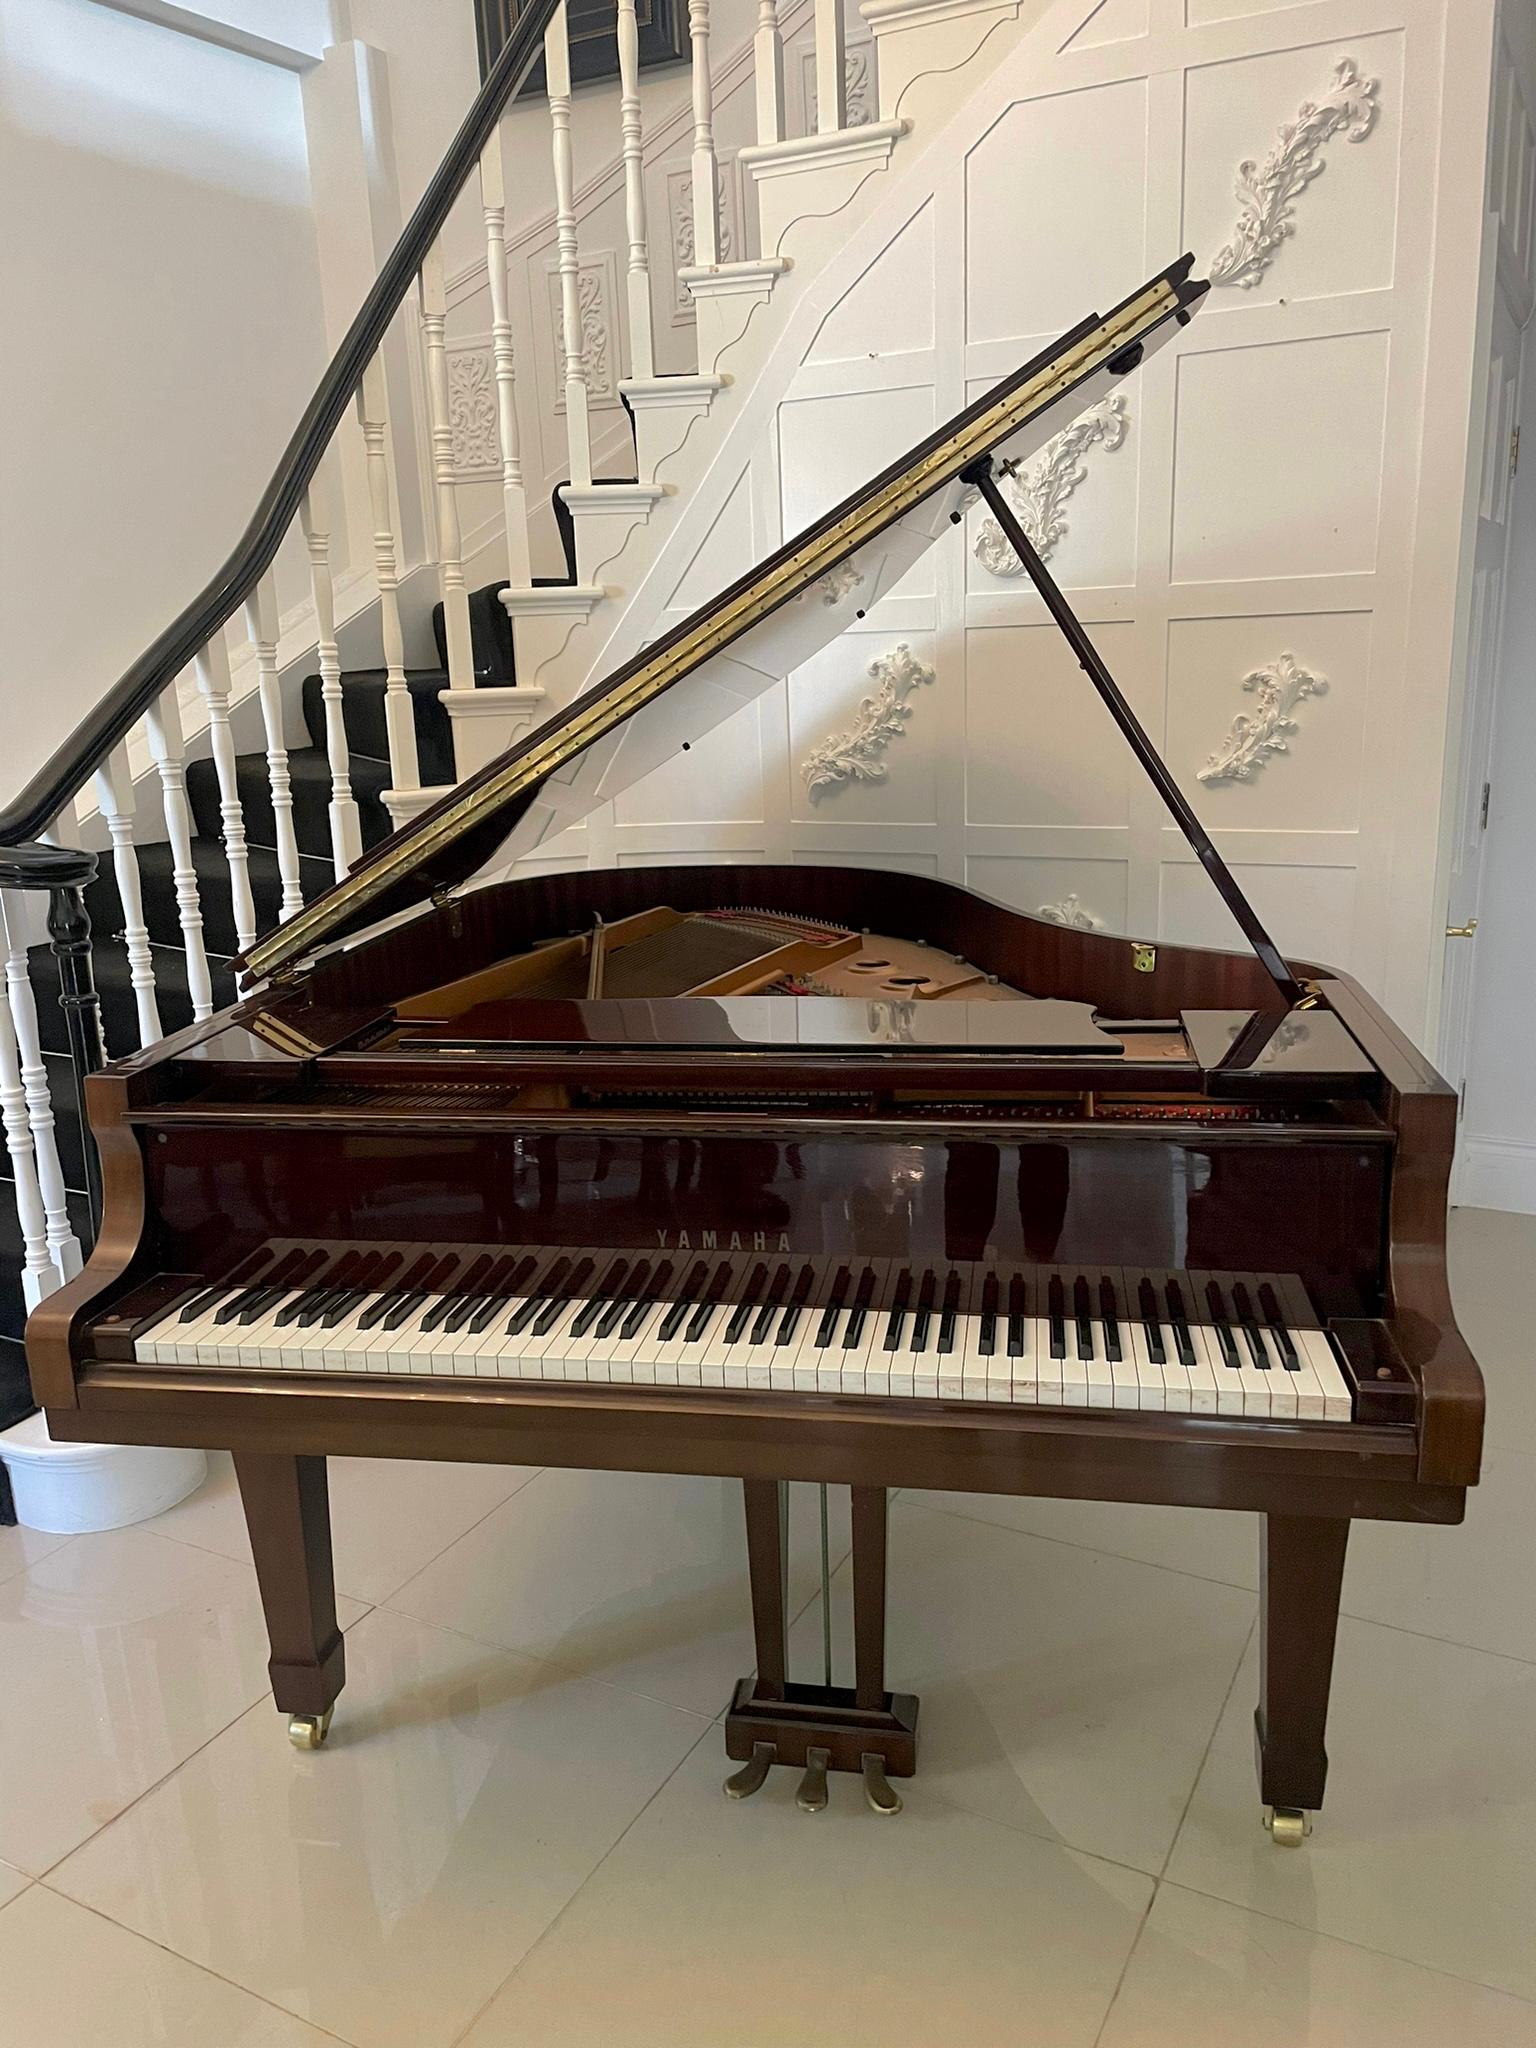 Quality Yamaha baby grand piano with an overstrung iron frame, frame and sound board in perfect condition, mahogany case standing on square tapering legs with spade feet brass castors 

An elegant classic example in wonderful